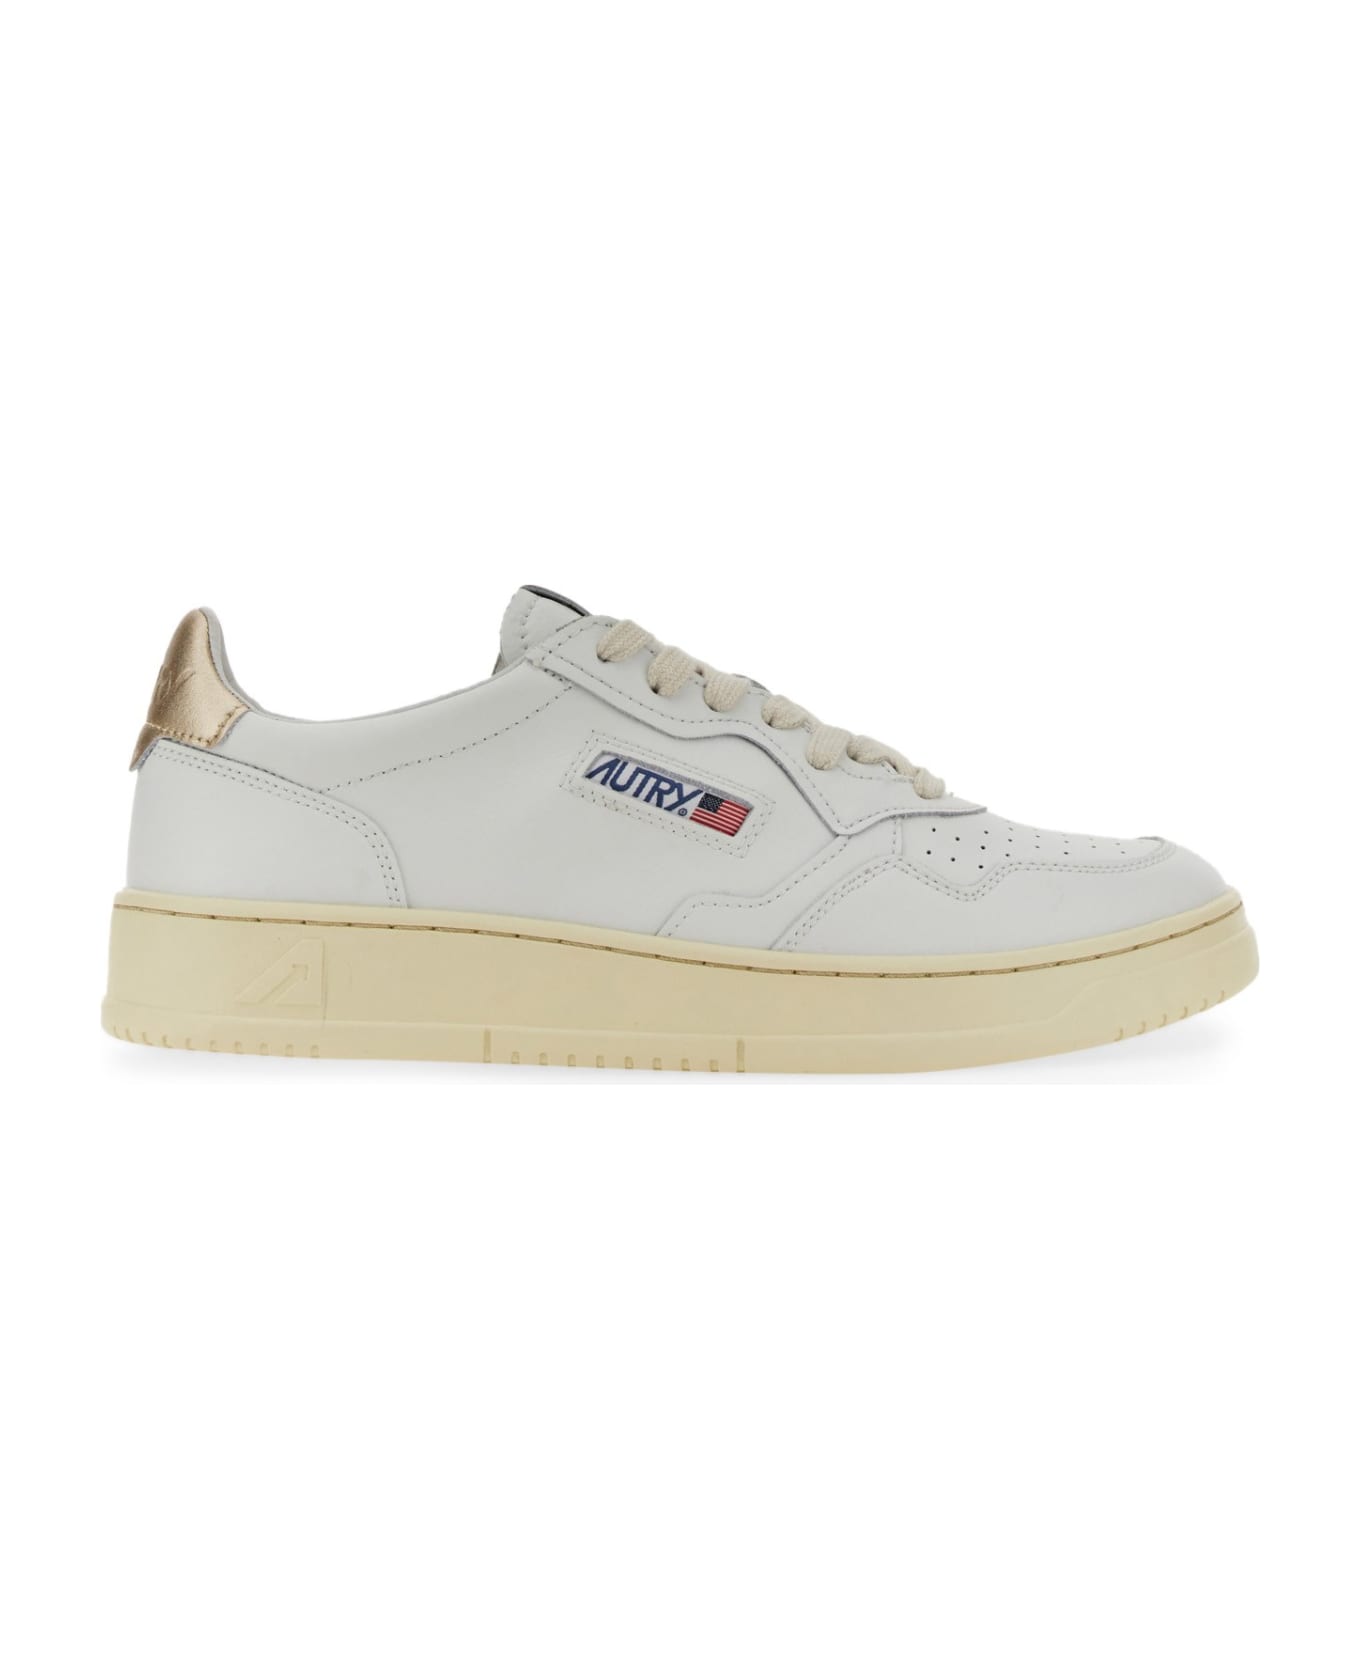 Autry 'll06' Leather Sneakers - WHITE